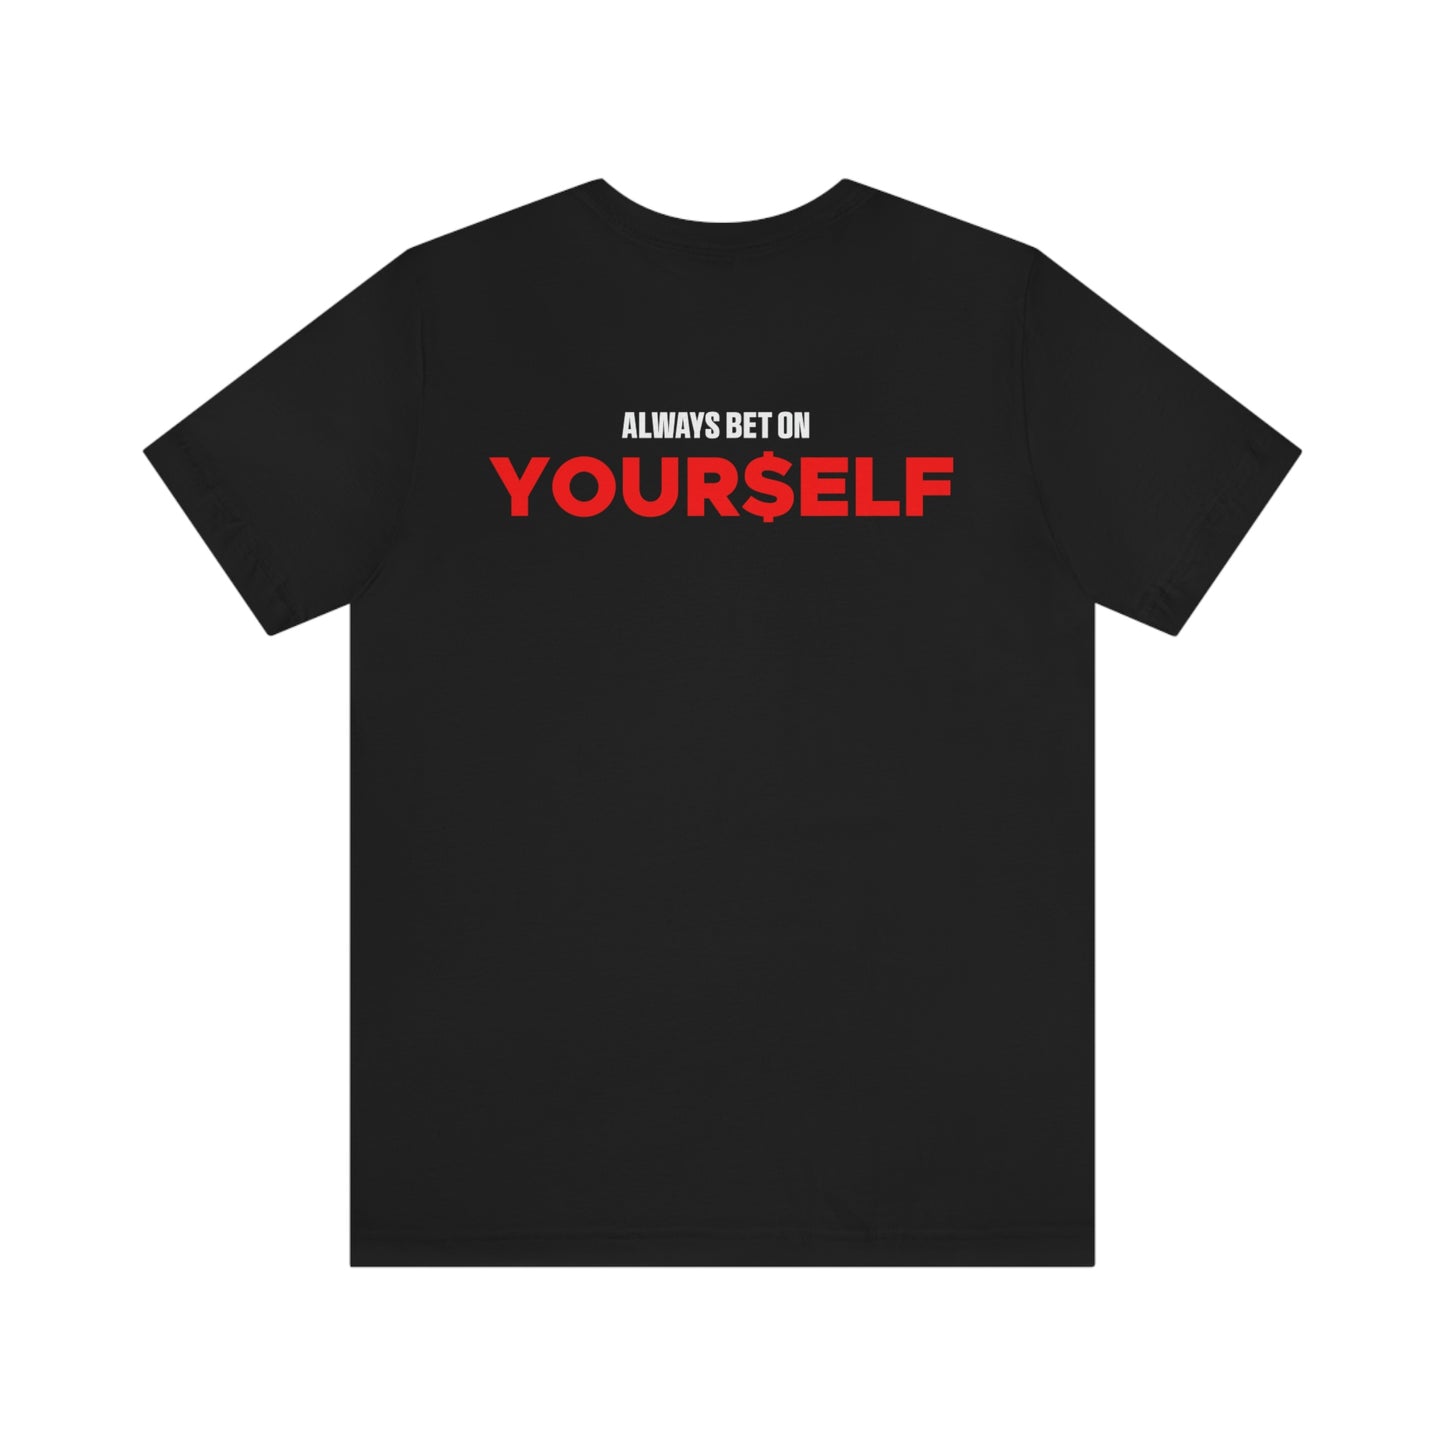 R'Mani Taylor: Bet on Yourself Tee